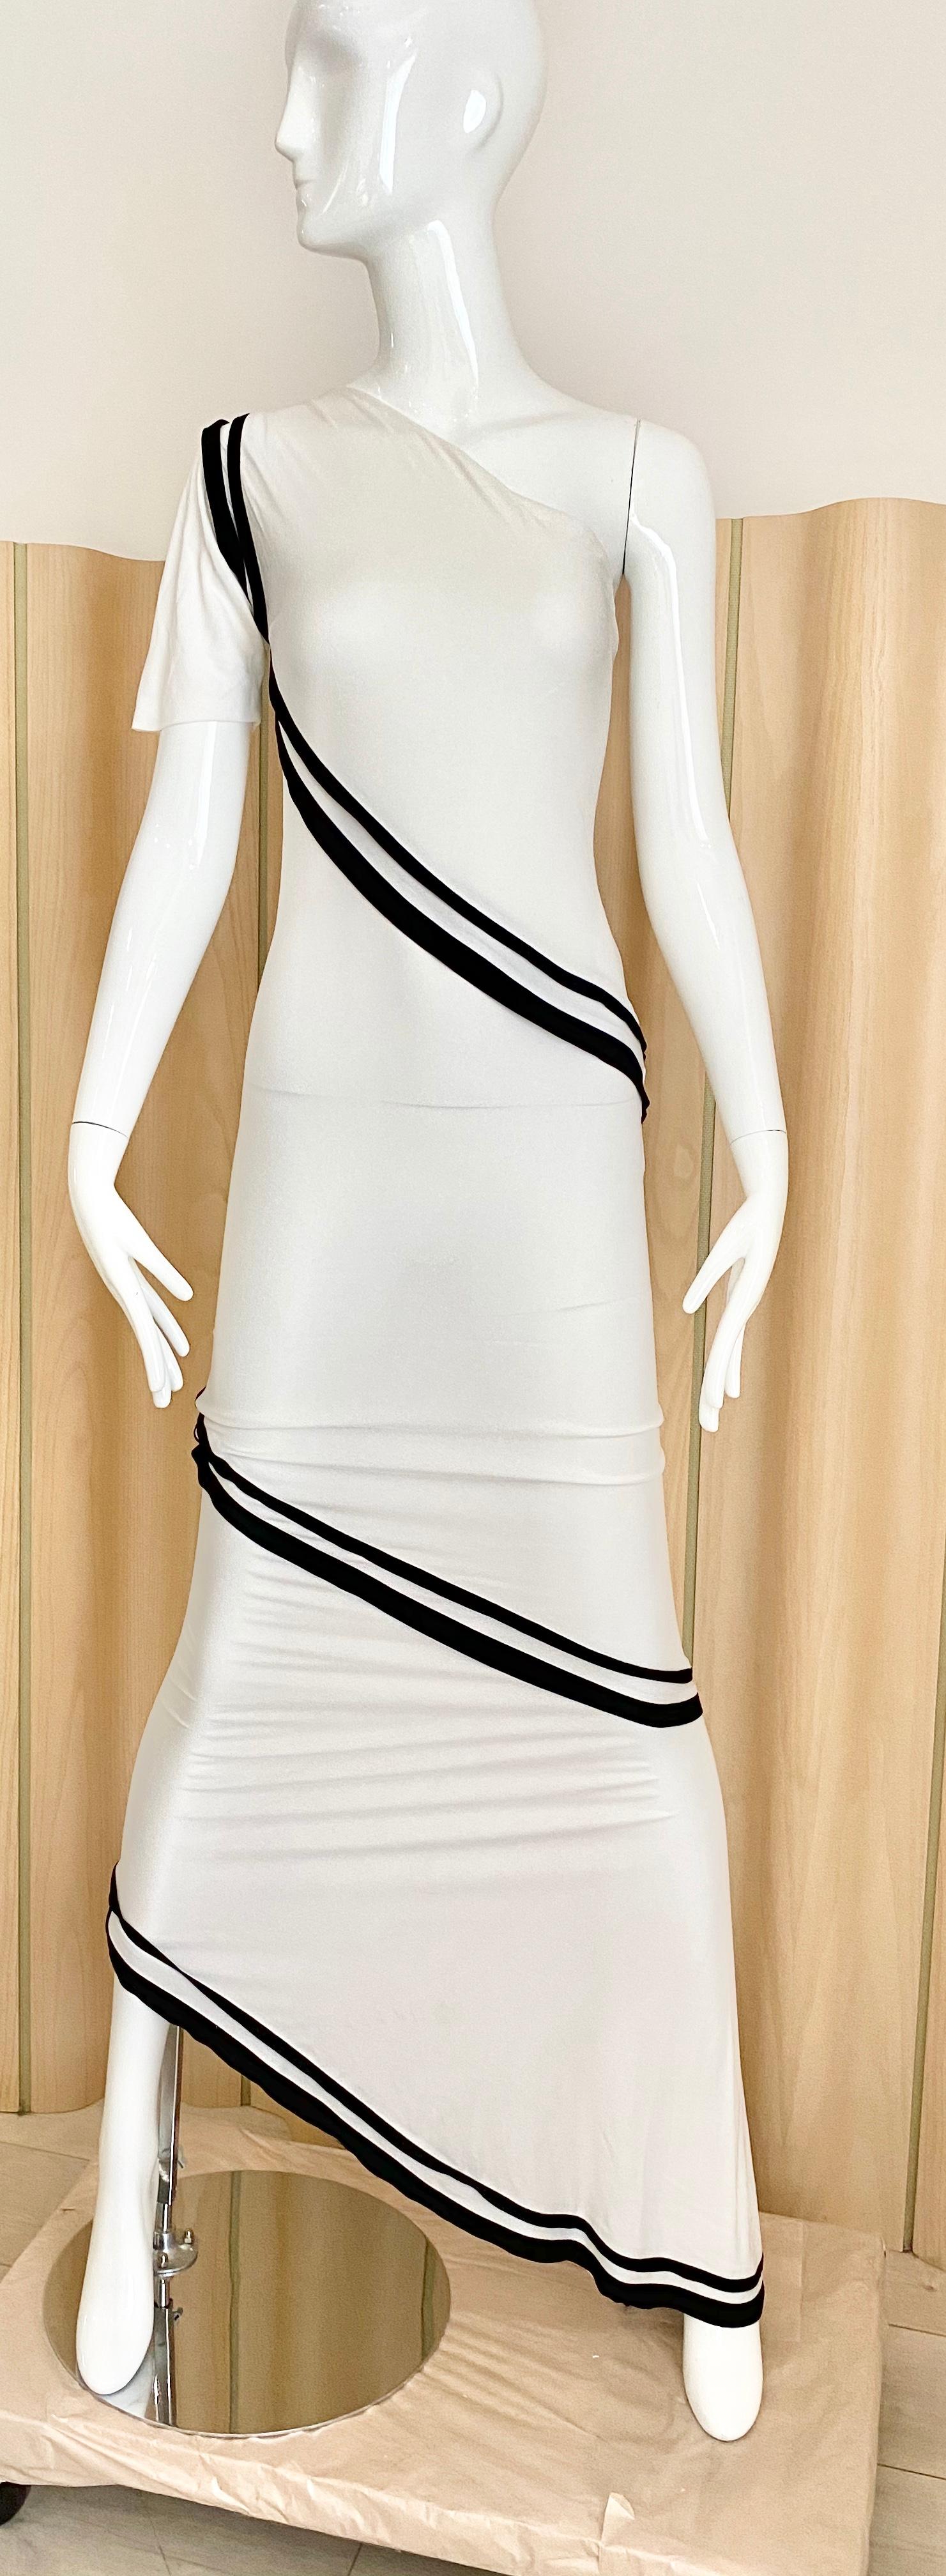 Beige 90s Gianfranco Ferre White and Black Knit One Shoulder Gown